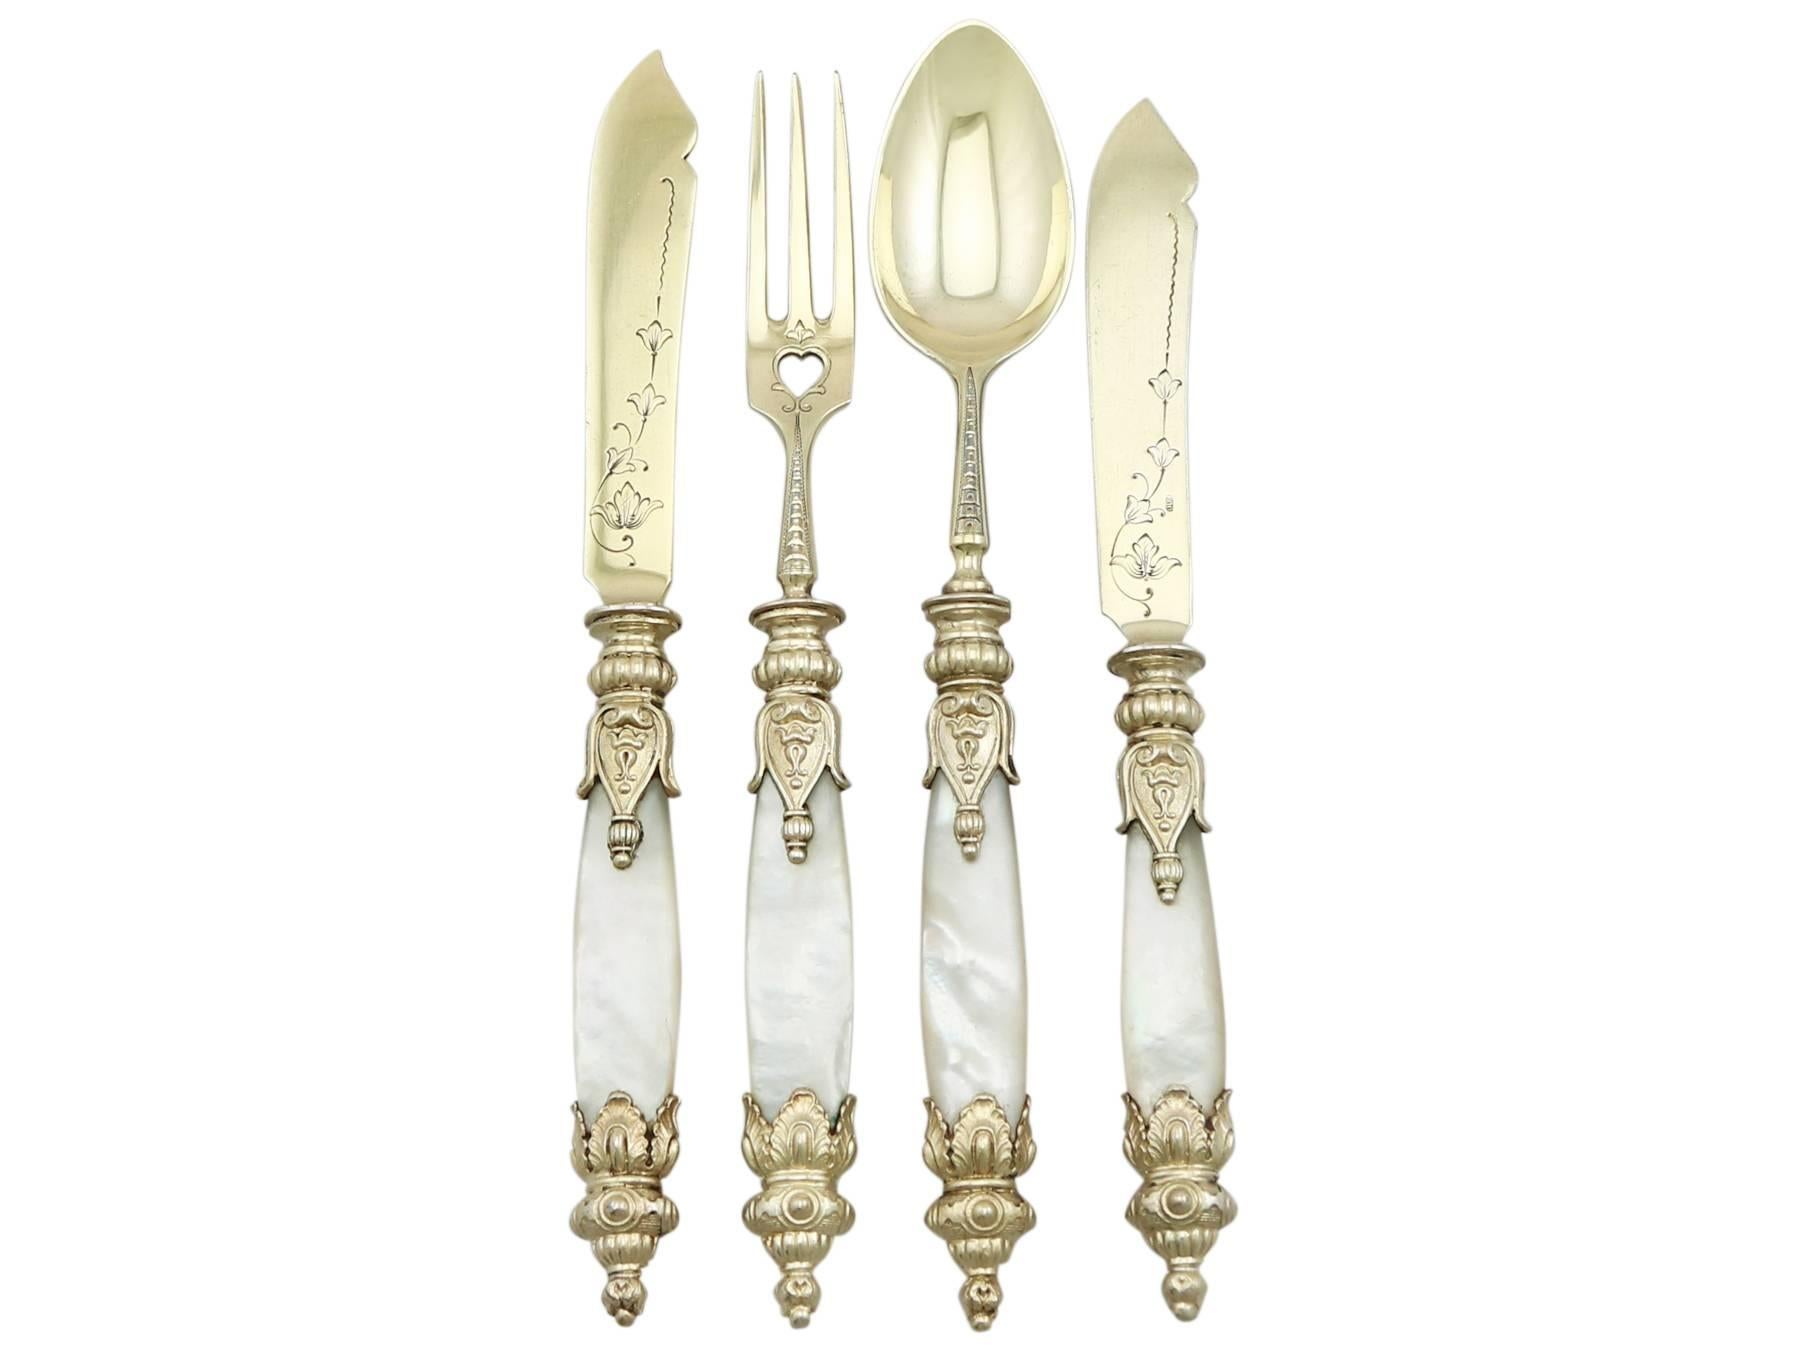 Early 20th Century Antique German Silver Gilt and Mother-of-Pearl Dessert Service